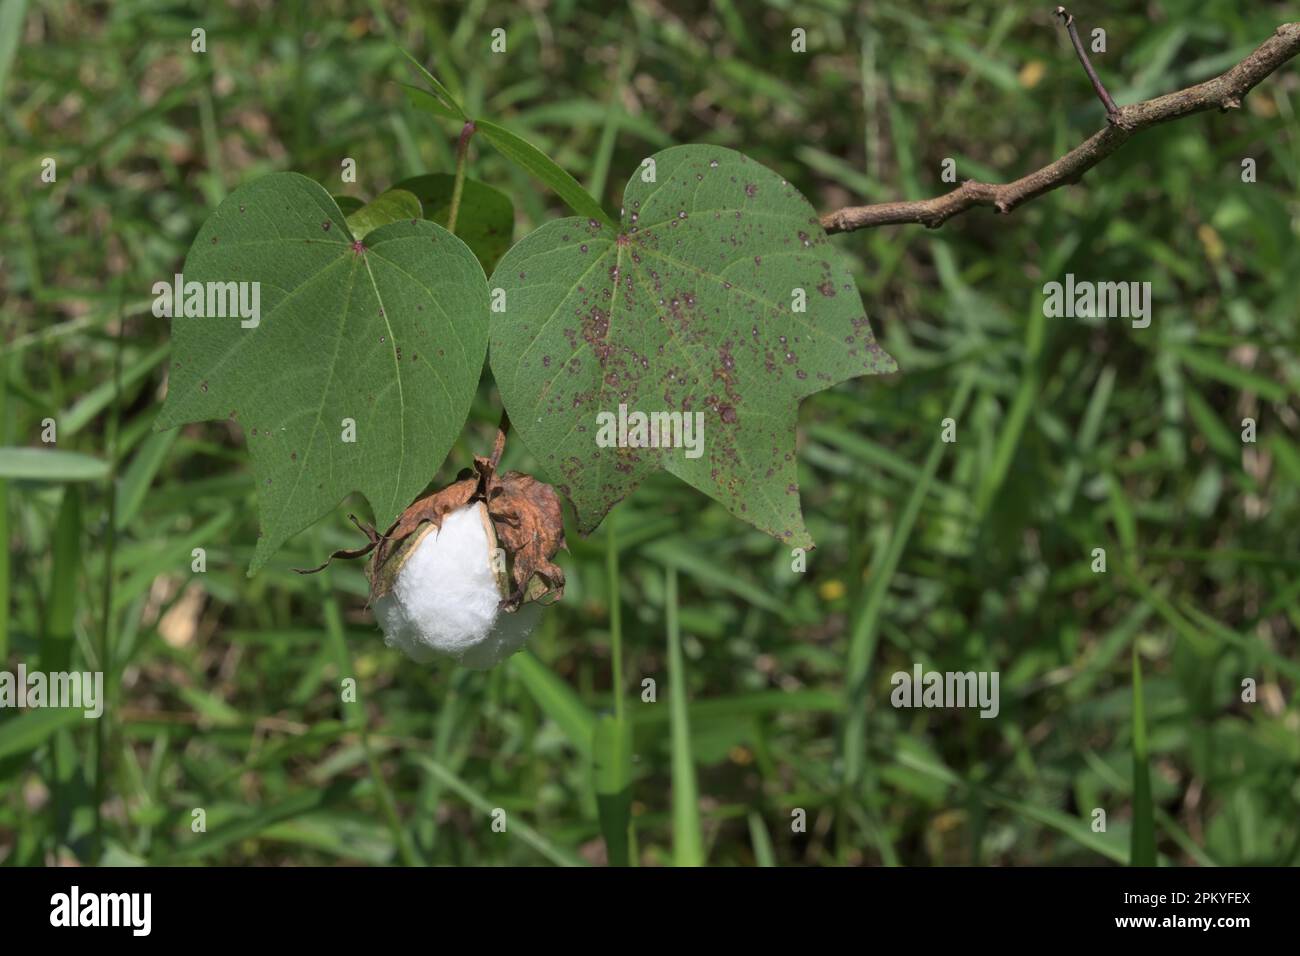 A dry white seed capsule of tree cotton plant (Gossypium Arboreum) with the two leaves Stock Photo